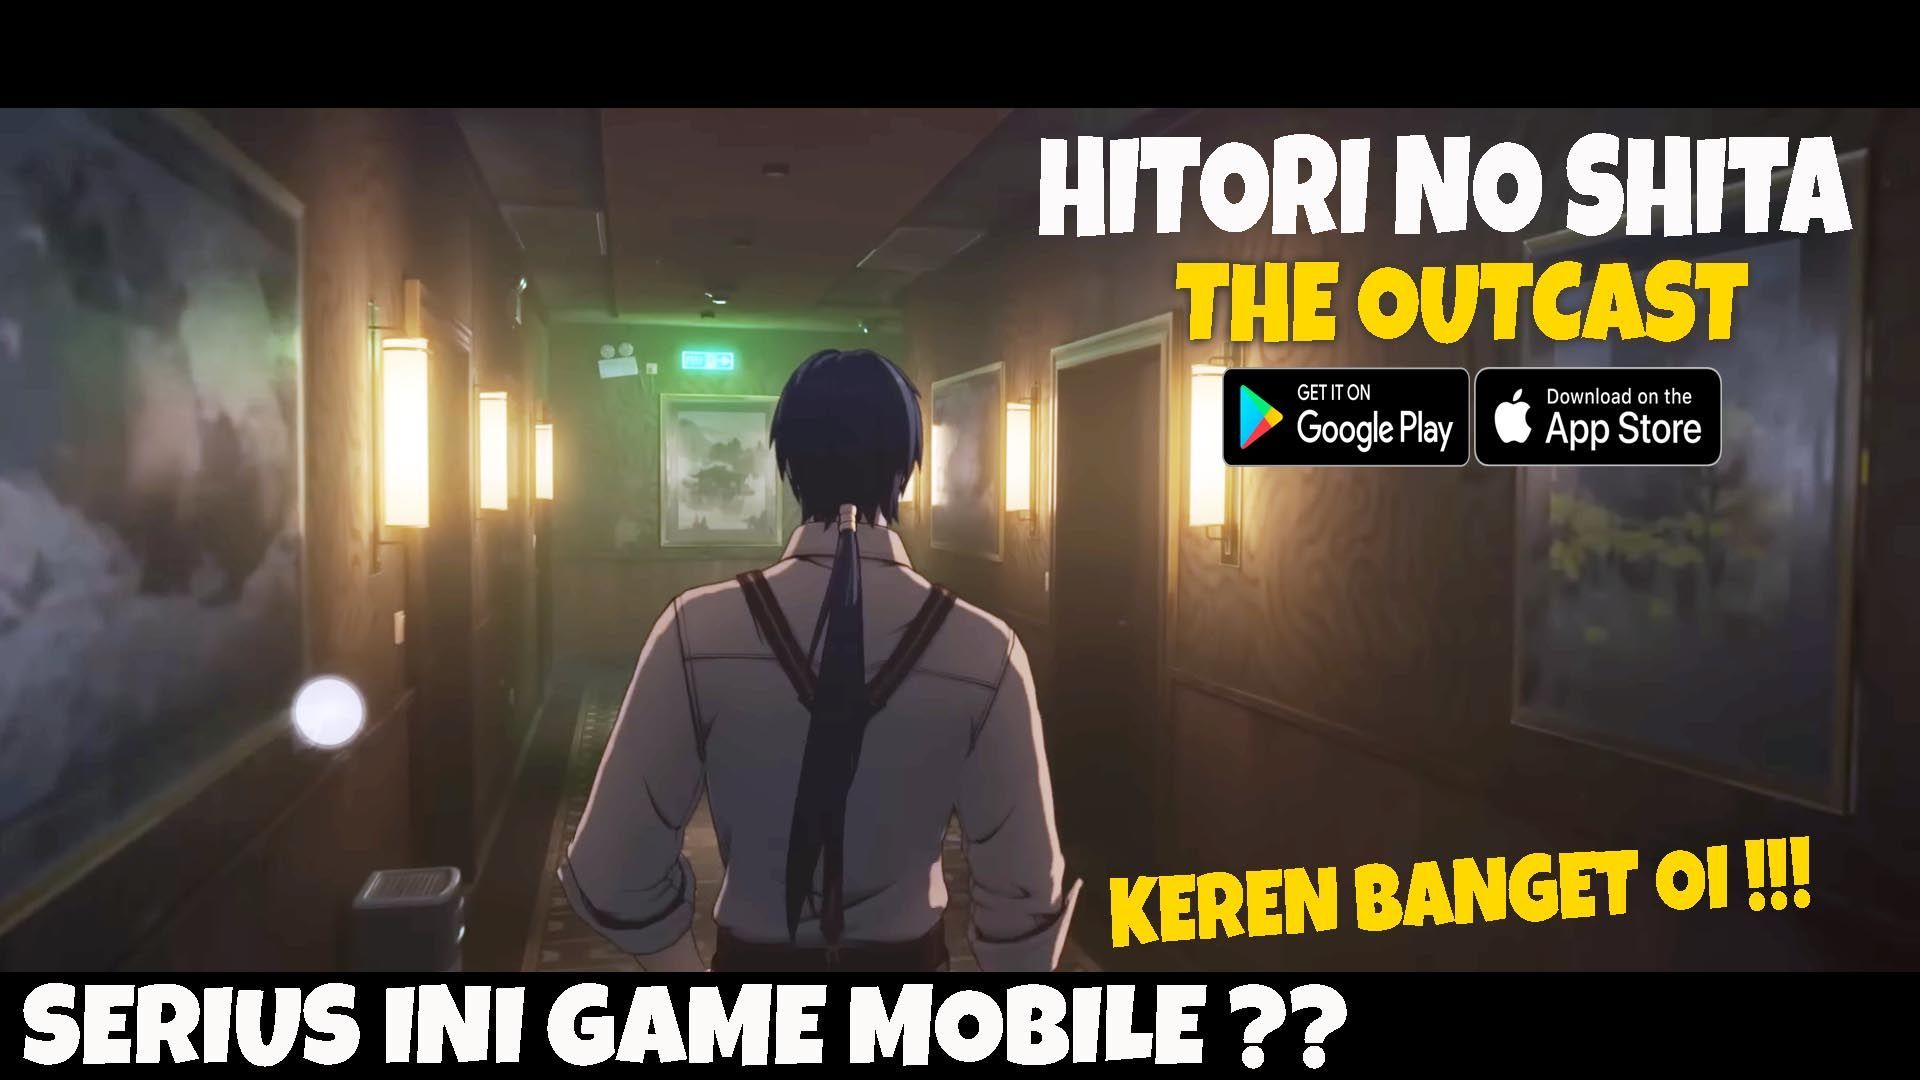 NEW* GAME HITORI NO SHITA: THE OUTCAST Gameplay (Android/iOS) 